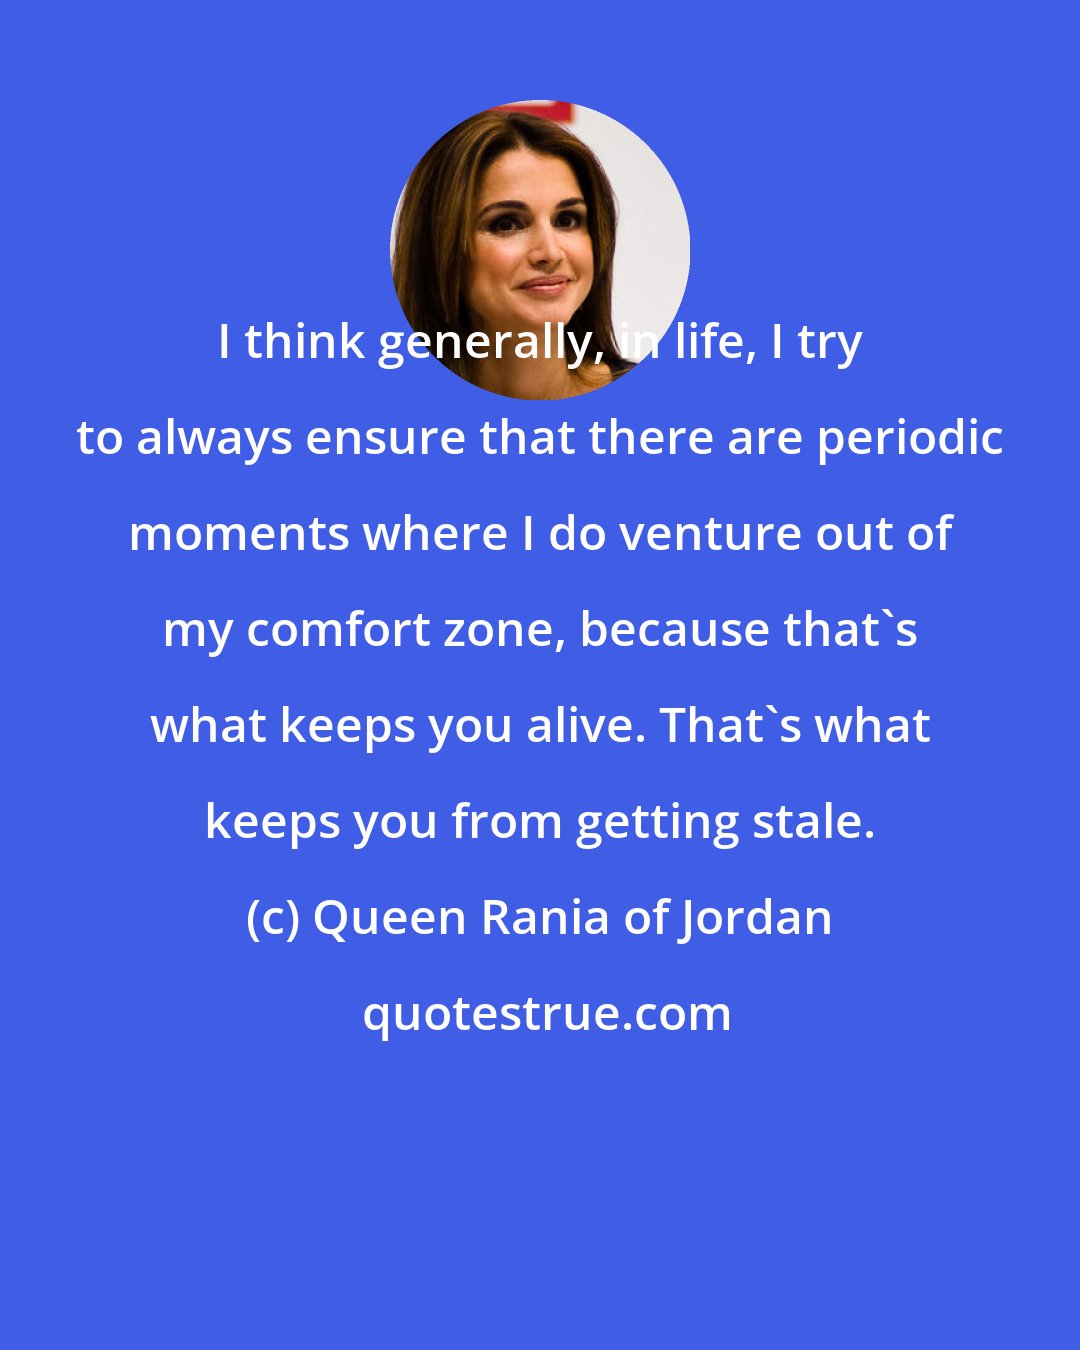 Queen Rania of Jordan: I think generally, in life, I try to always ensure that there are periodic moments where I do venture out of my comfort zone, because that's what keeps you alive. That's what keeps you from getting stale.